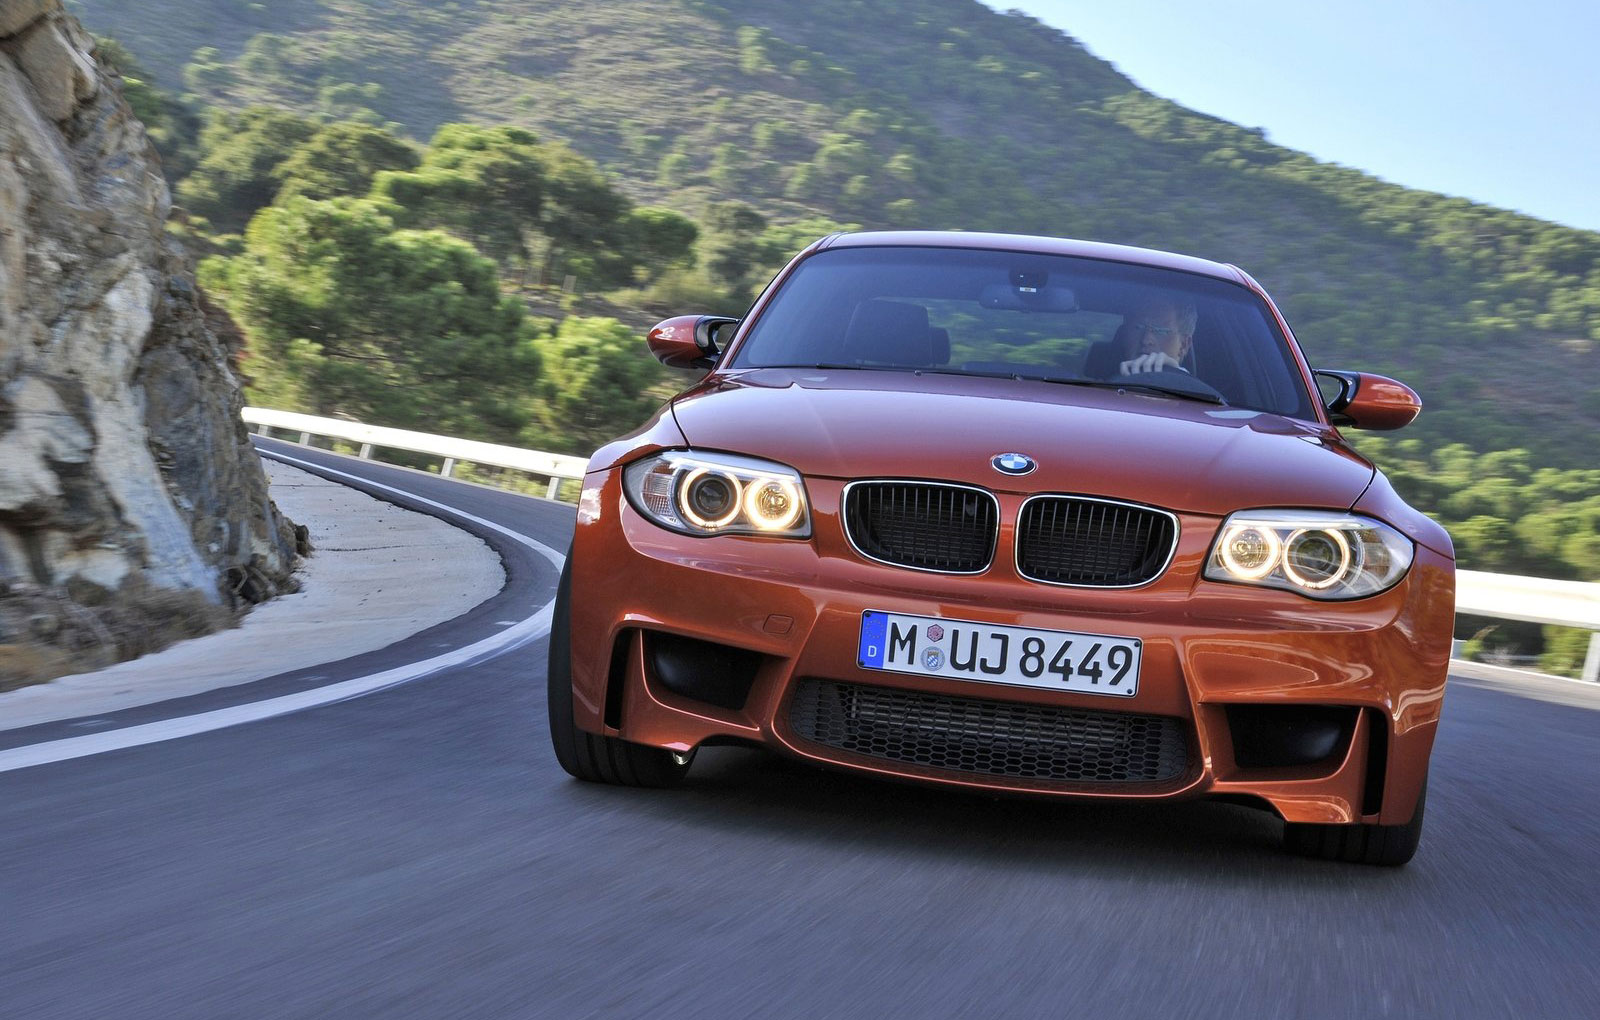 The new BMW 1 Series M Coupe will be pulled out of production in December